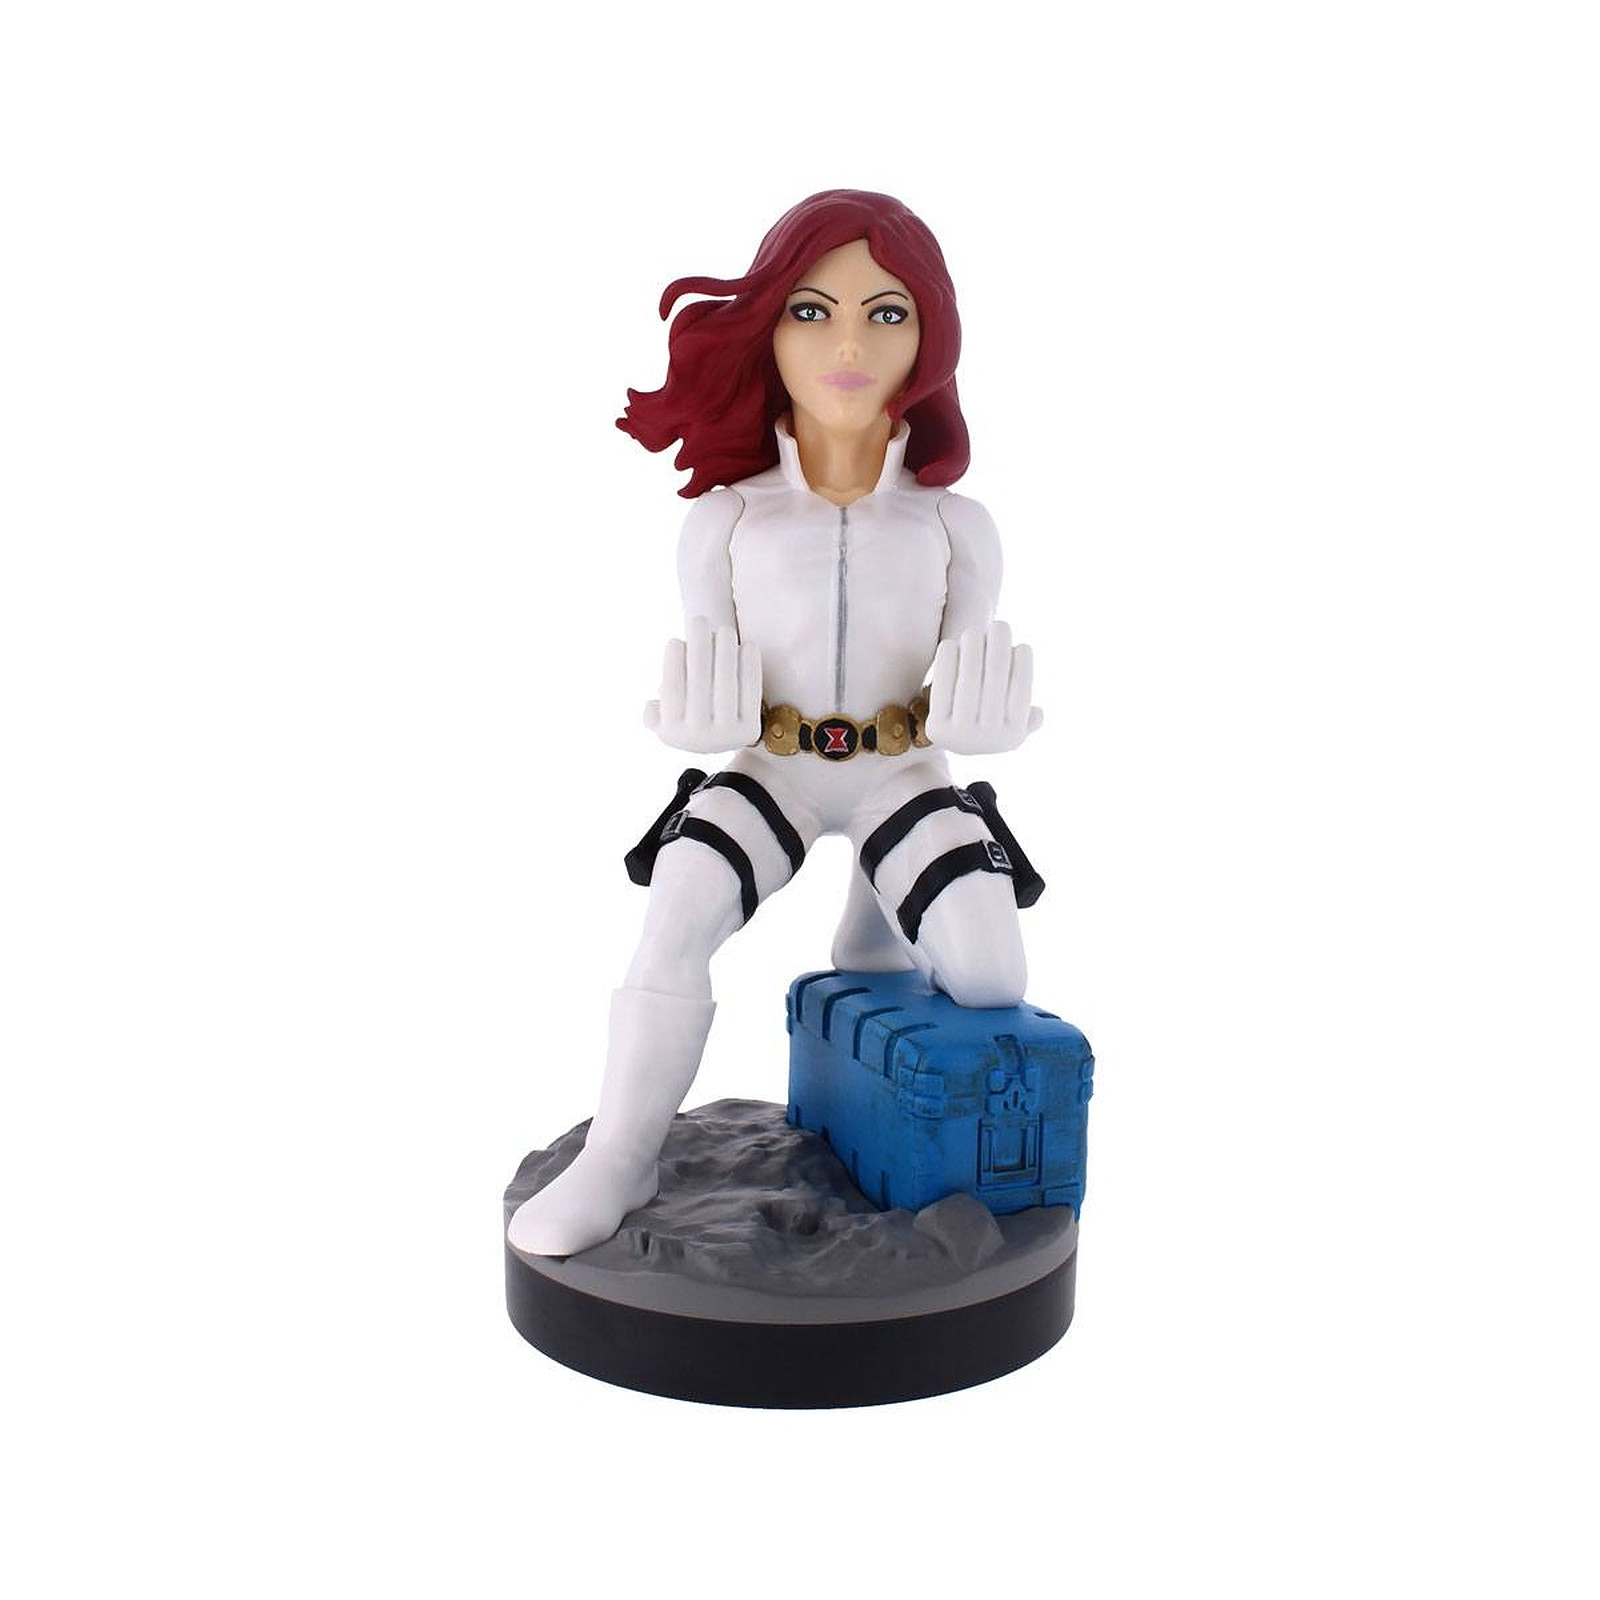 Marvel - Figurine Cable Guy Black Widow White Suit 20 cm - Figurines Exquisite Gaming